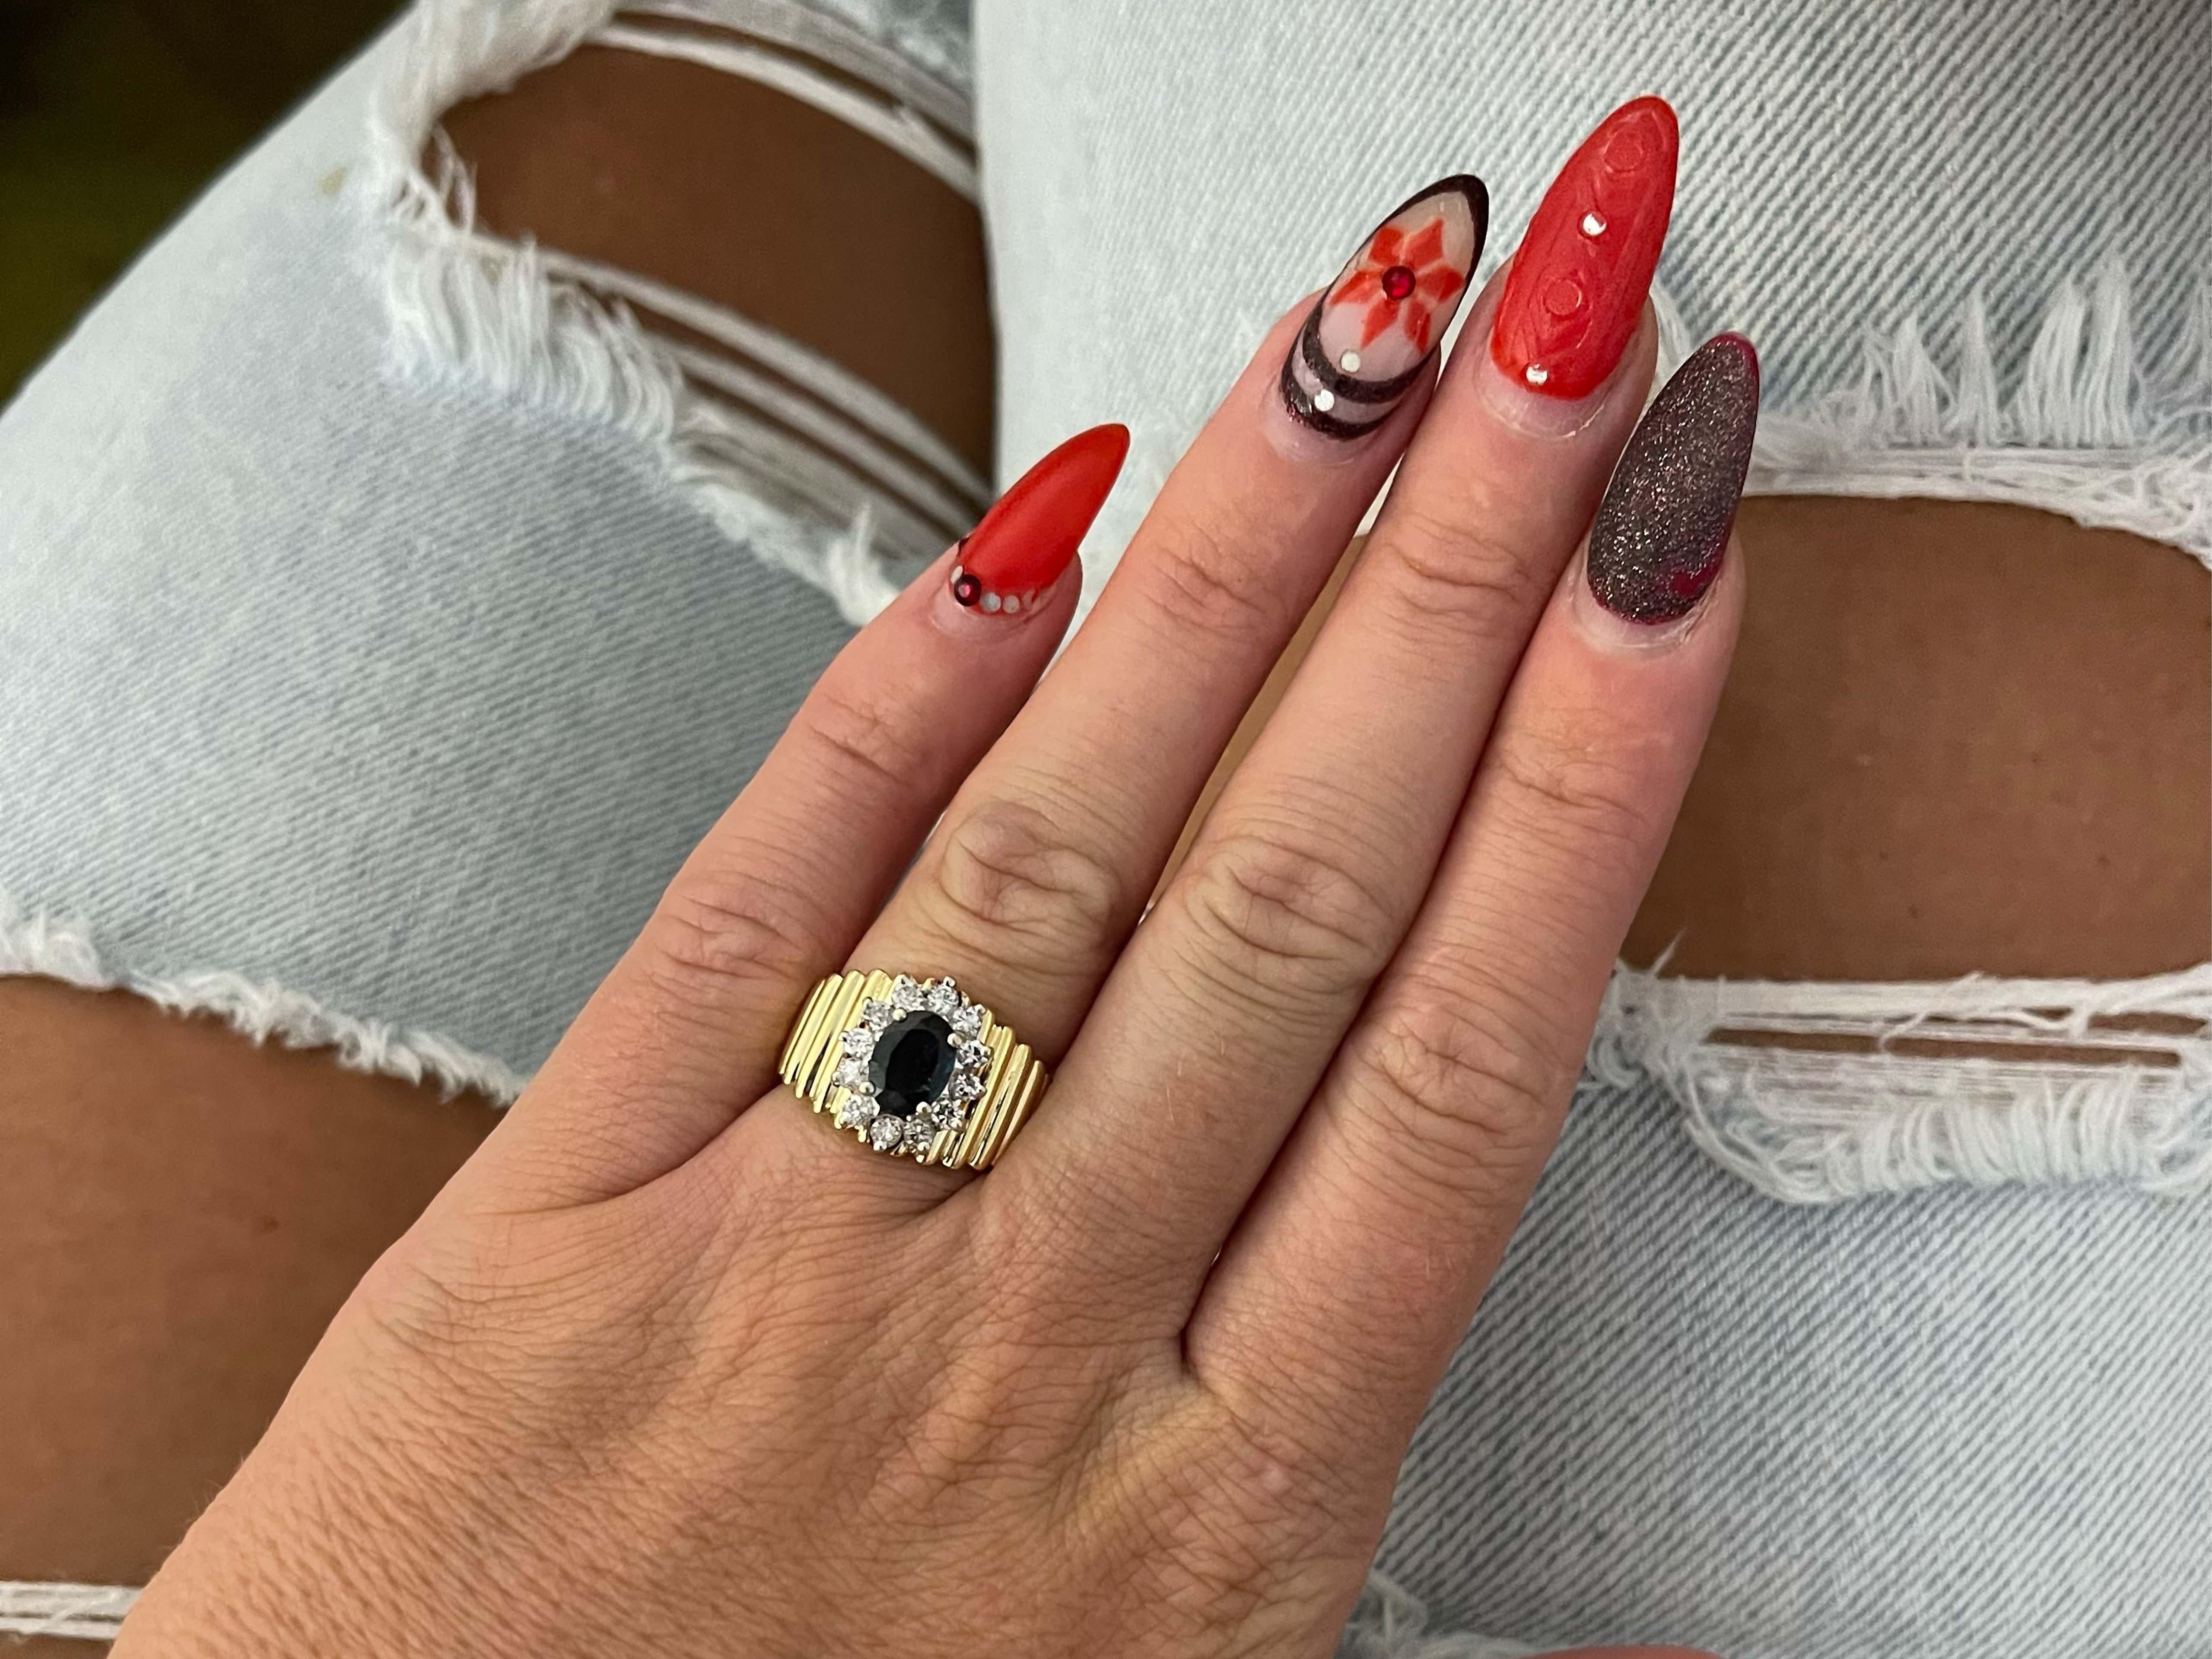 Item Specifications:

Metal: 14K Yellow Gold

Style: Statement Ring

Ring Size: 6 (resizing available for a fee)

Total Weight: 5.5 Grams

Ring Height: 13.92 mm

Gemstone Specifications:

Gemstone: 1 blue sapphire

Shape: oval

Sapphire